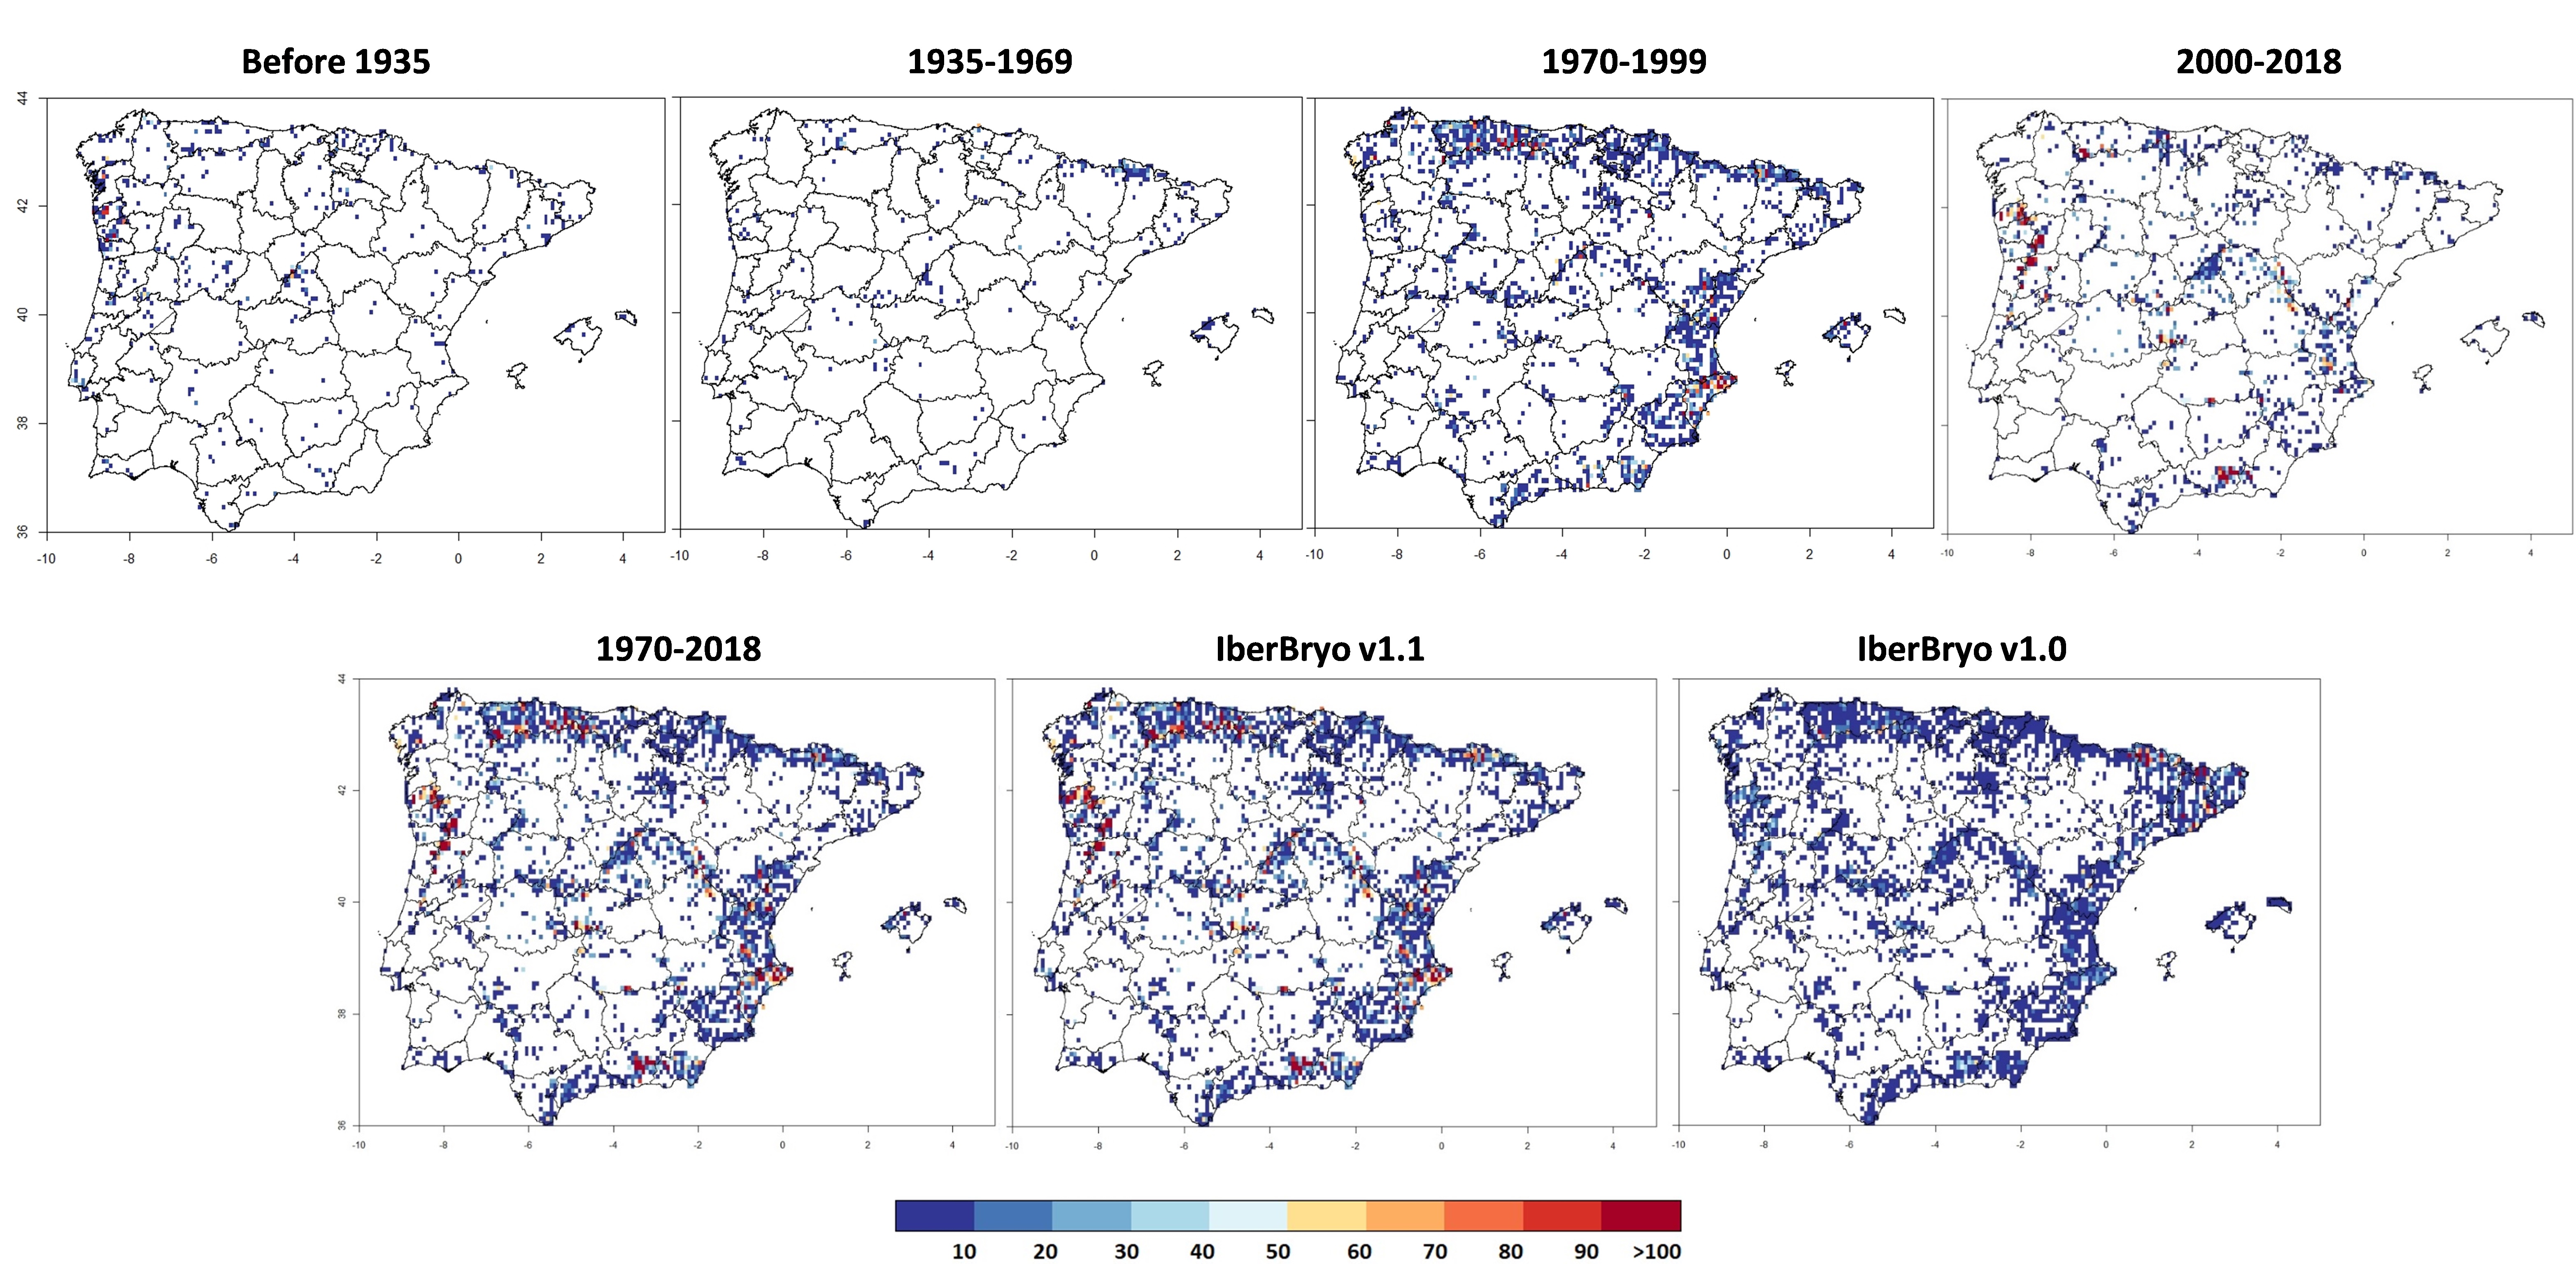 Supplementary Material 4 From Ronquillo C Alves Martins F Mazimpaka V Sobral Souza T Vilela Silva B G Medina N Hortal J Assessing Spatial And Temporal Biases And Gaps In The Publicly Available Distributional